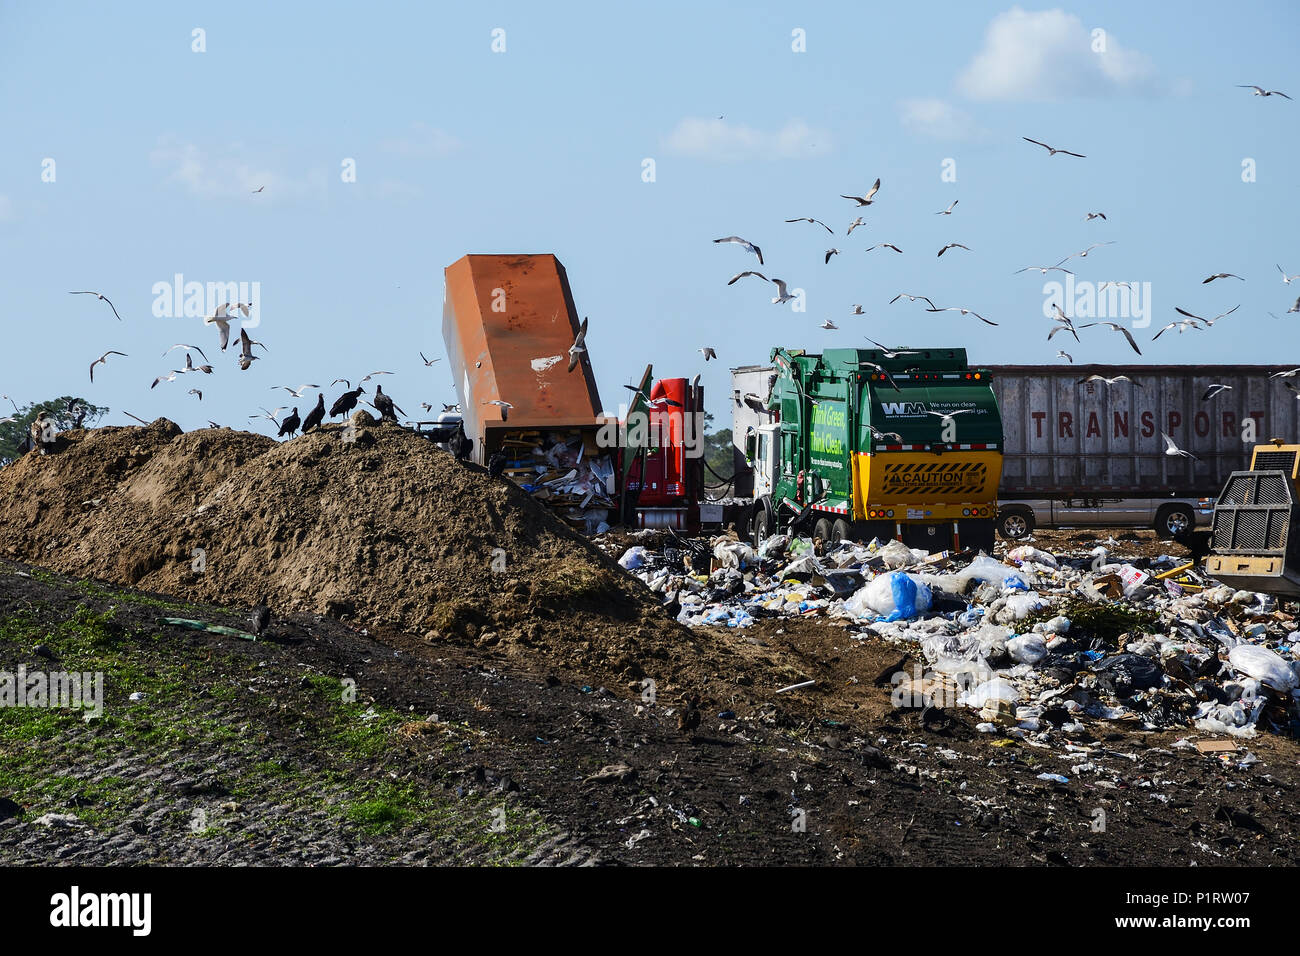 Landfill operations, with various vehicles and seagulls, Sarasota County; Florida, United States of America Stock Photo